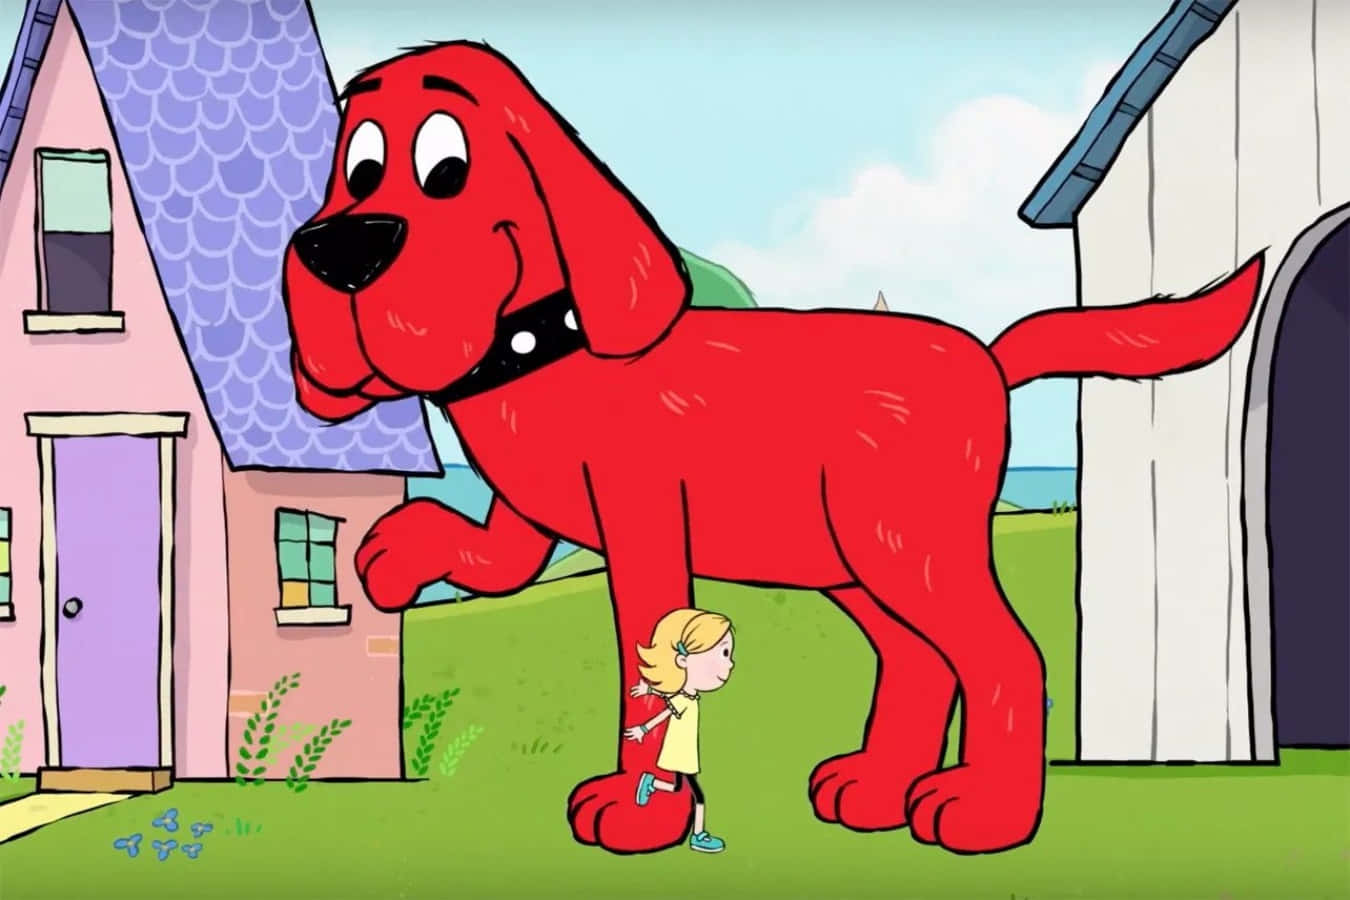 Clifford The Big Red Dog loves adventures!